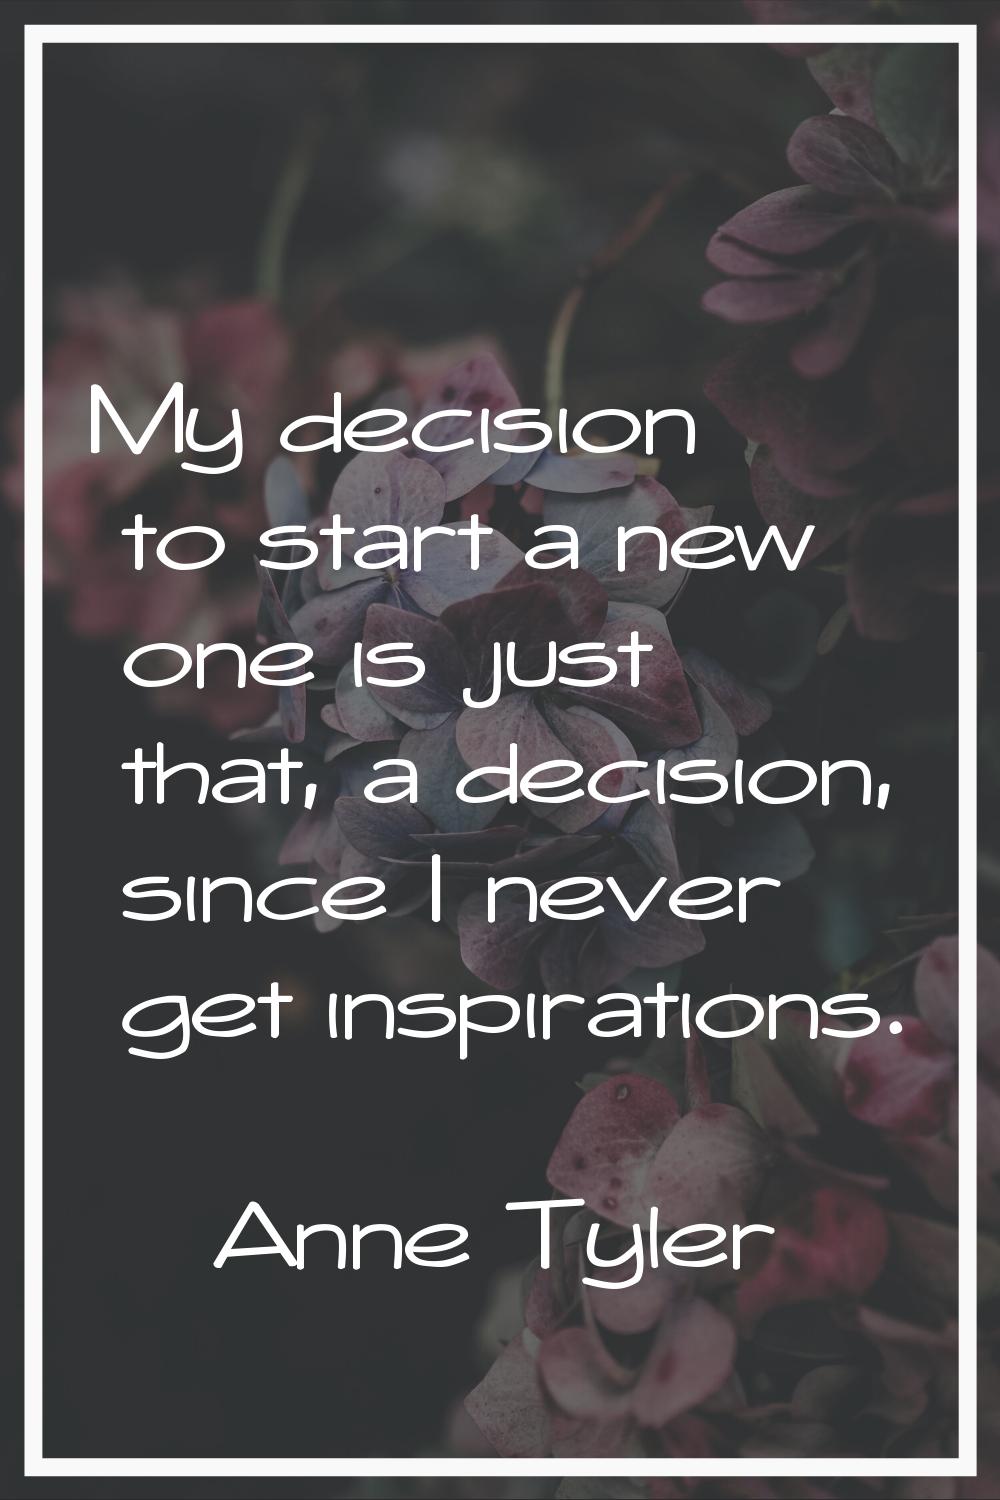 My decision to start a new one is just that, a decision, since I never get inspirations.